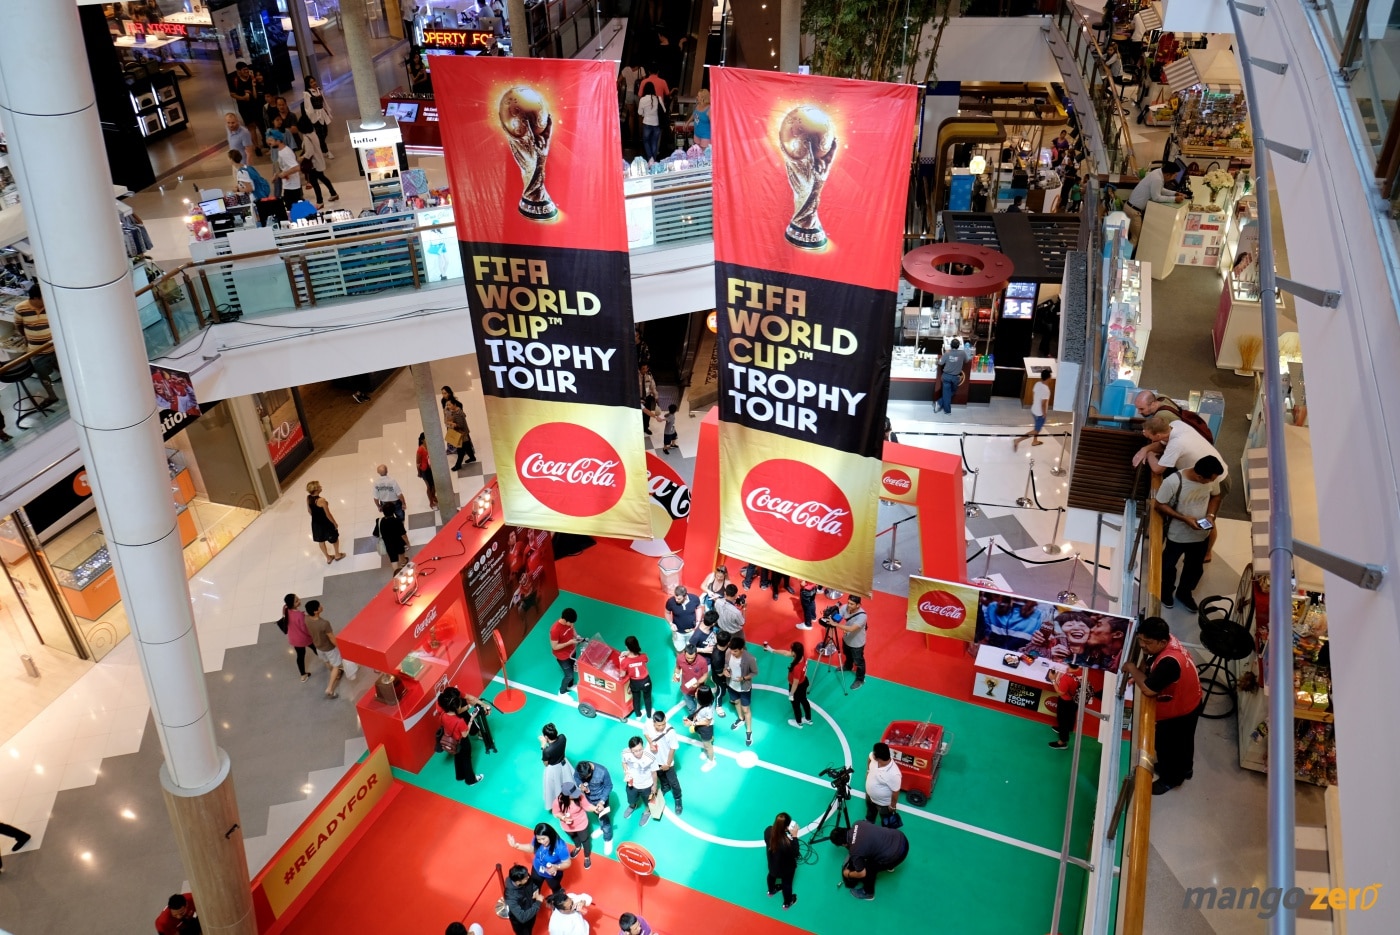 2018-fifa-world-cup-trophy-tour-by-coca-cola-at-phuket-37